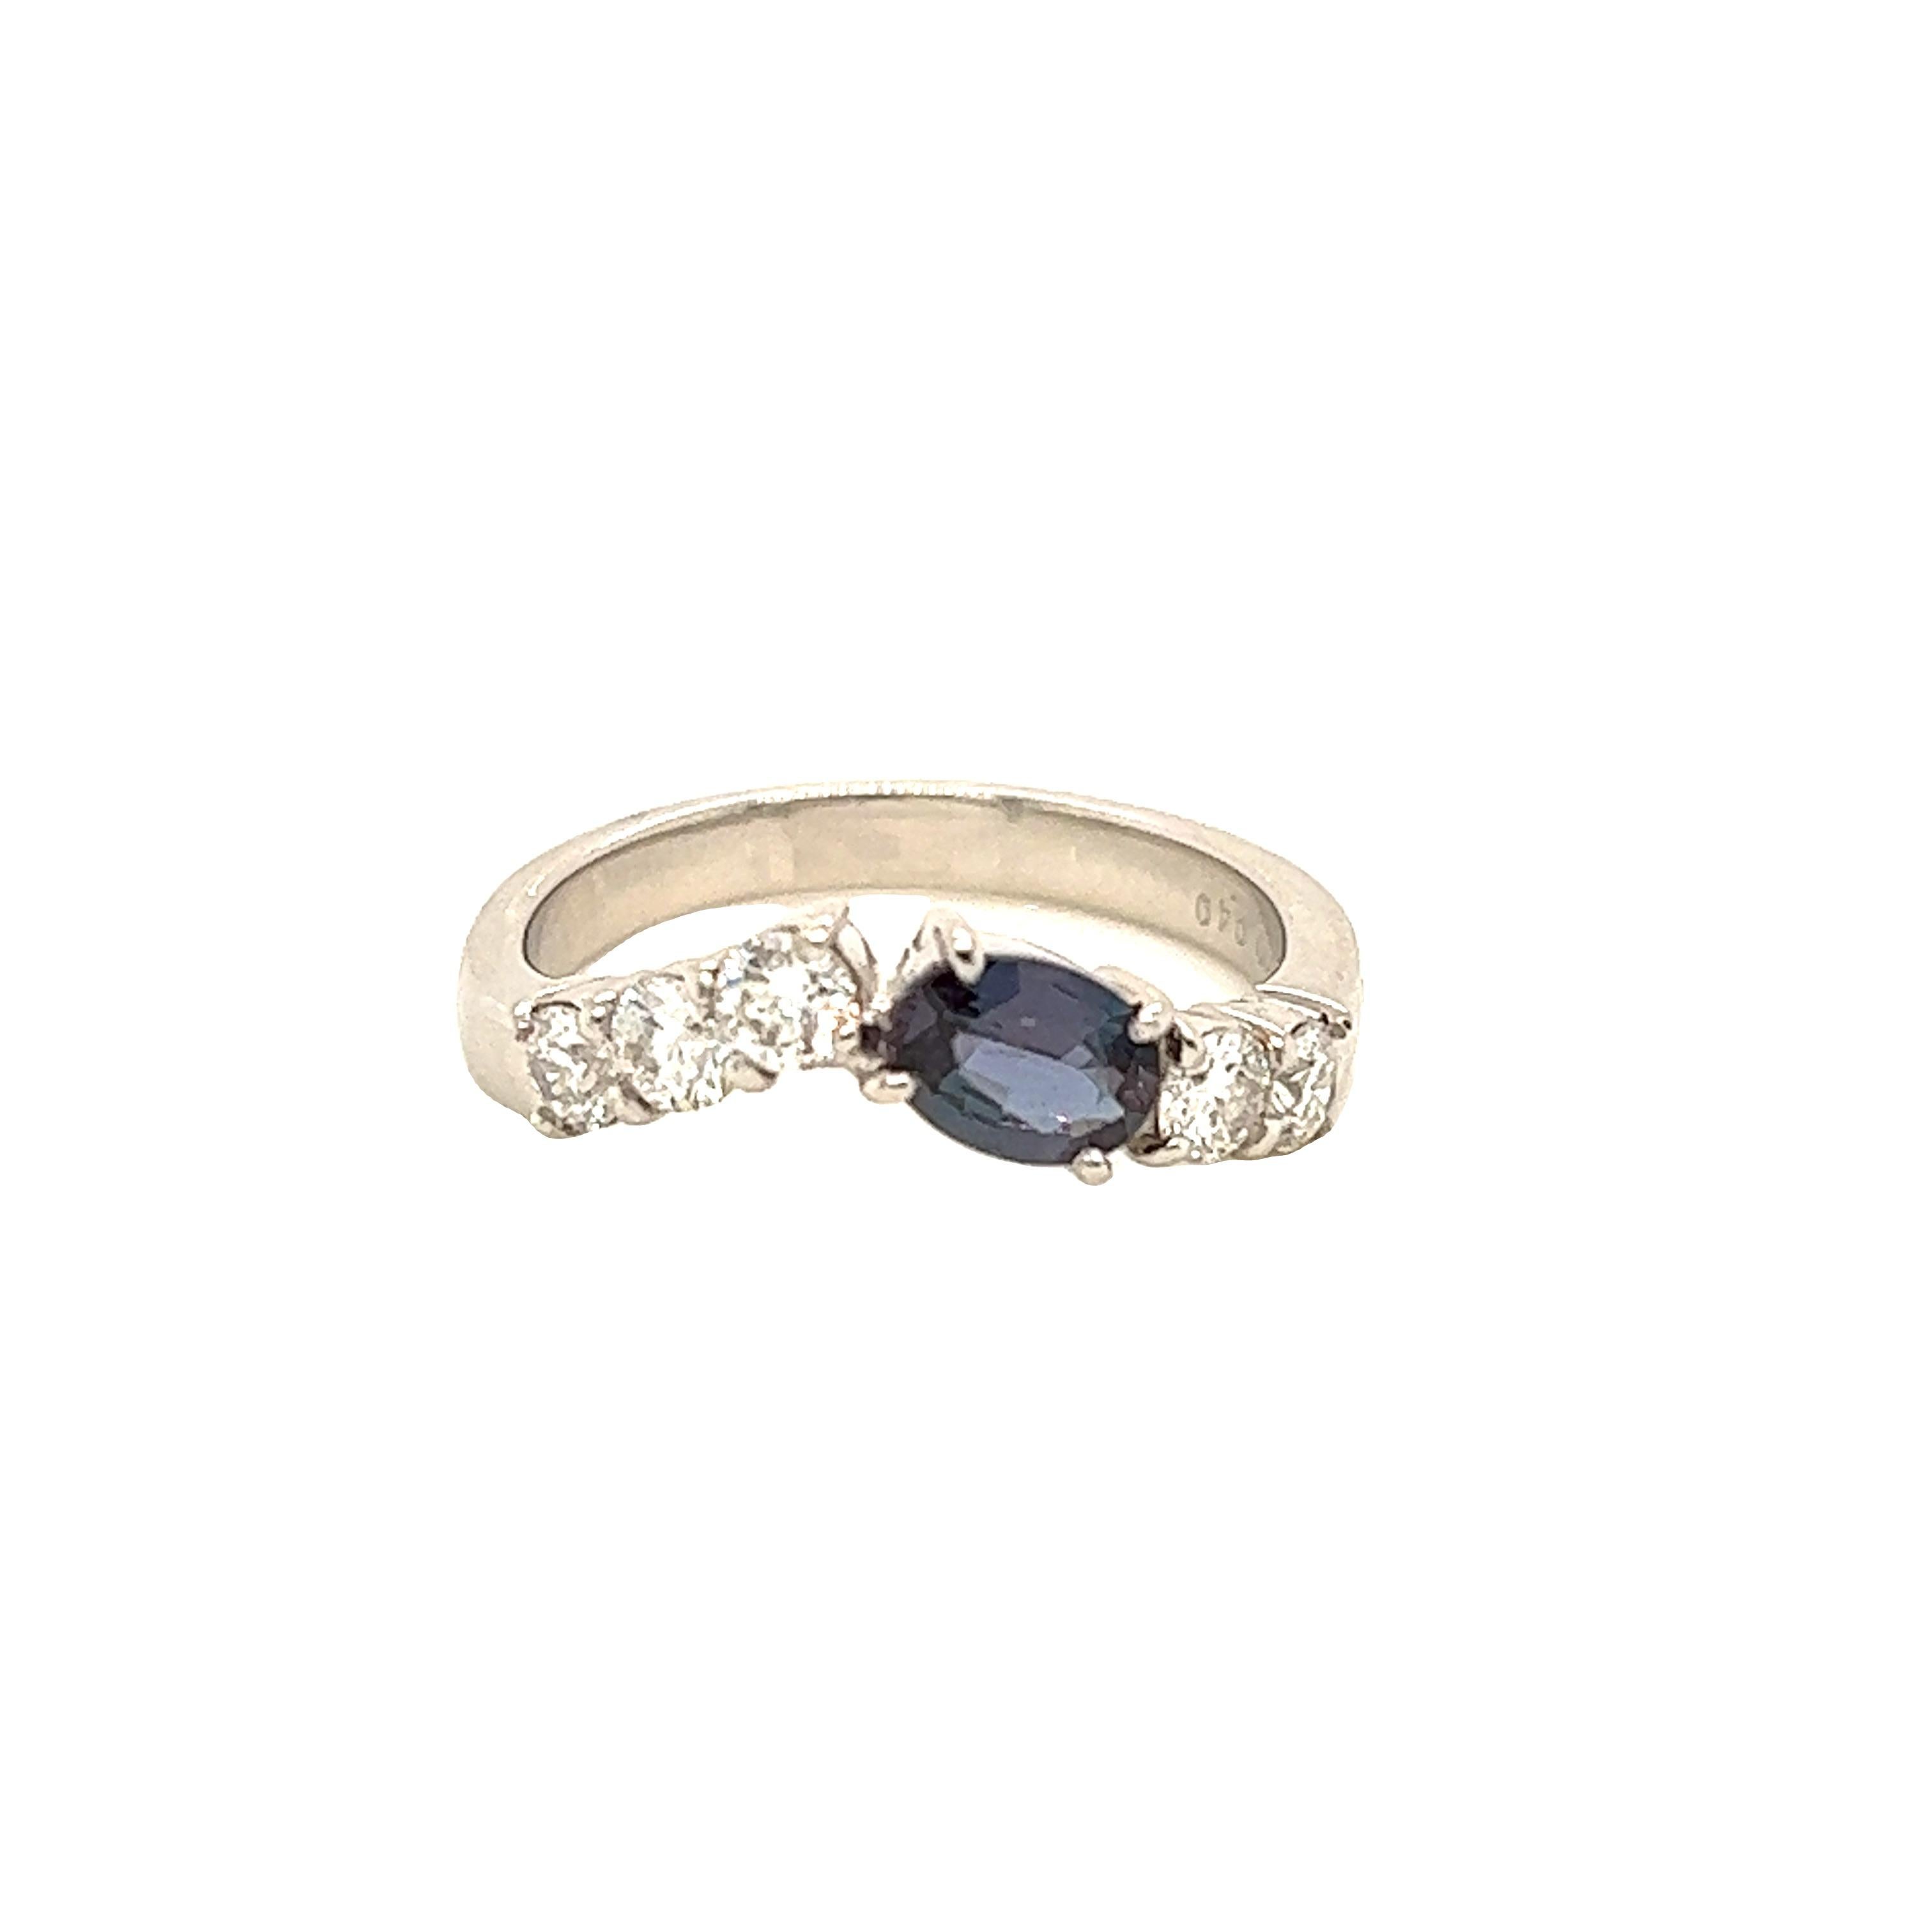 This is a gorgeous natural AAA quality oval Alexandrite surrounded by dainty diamonds that is set in a vintage platinum setting. This ring features a natural 0.40 carat oval alexandrite that is certified by the Gemological Institute of America (GIA)